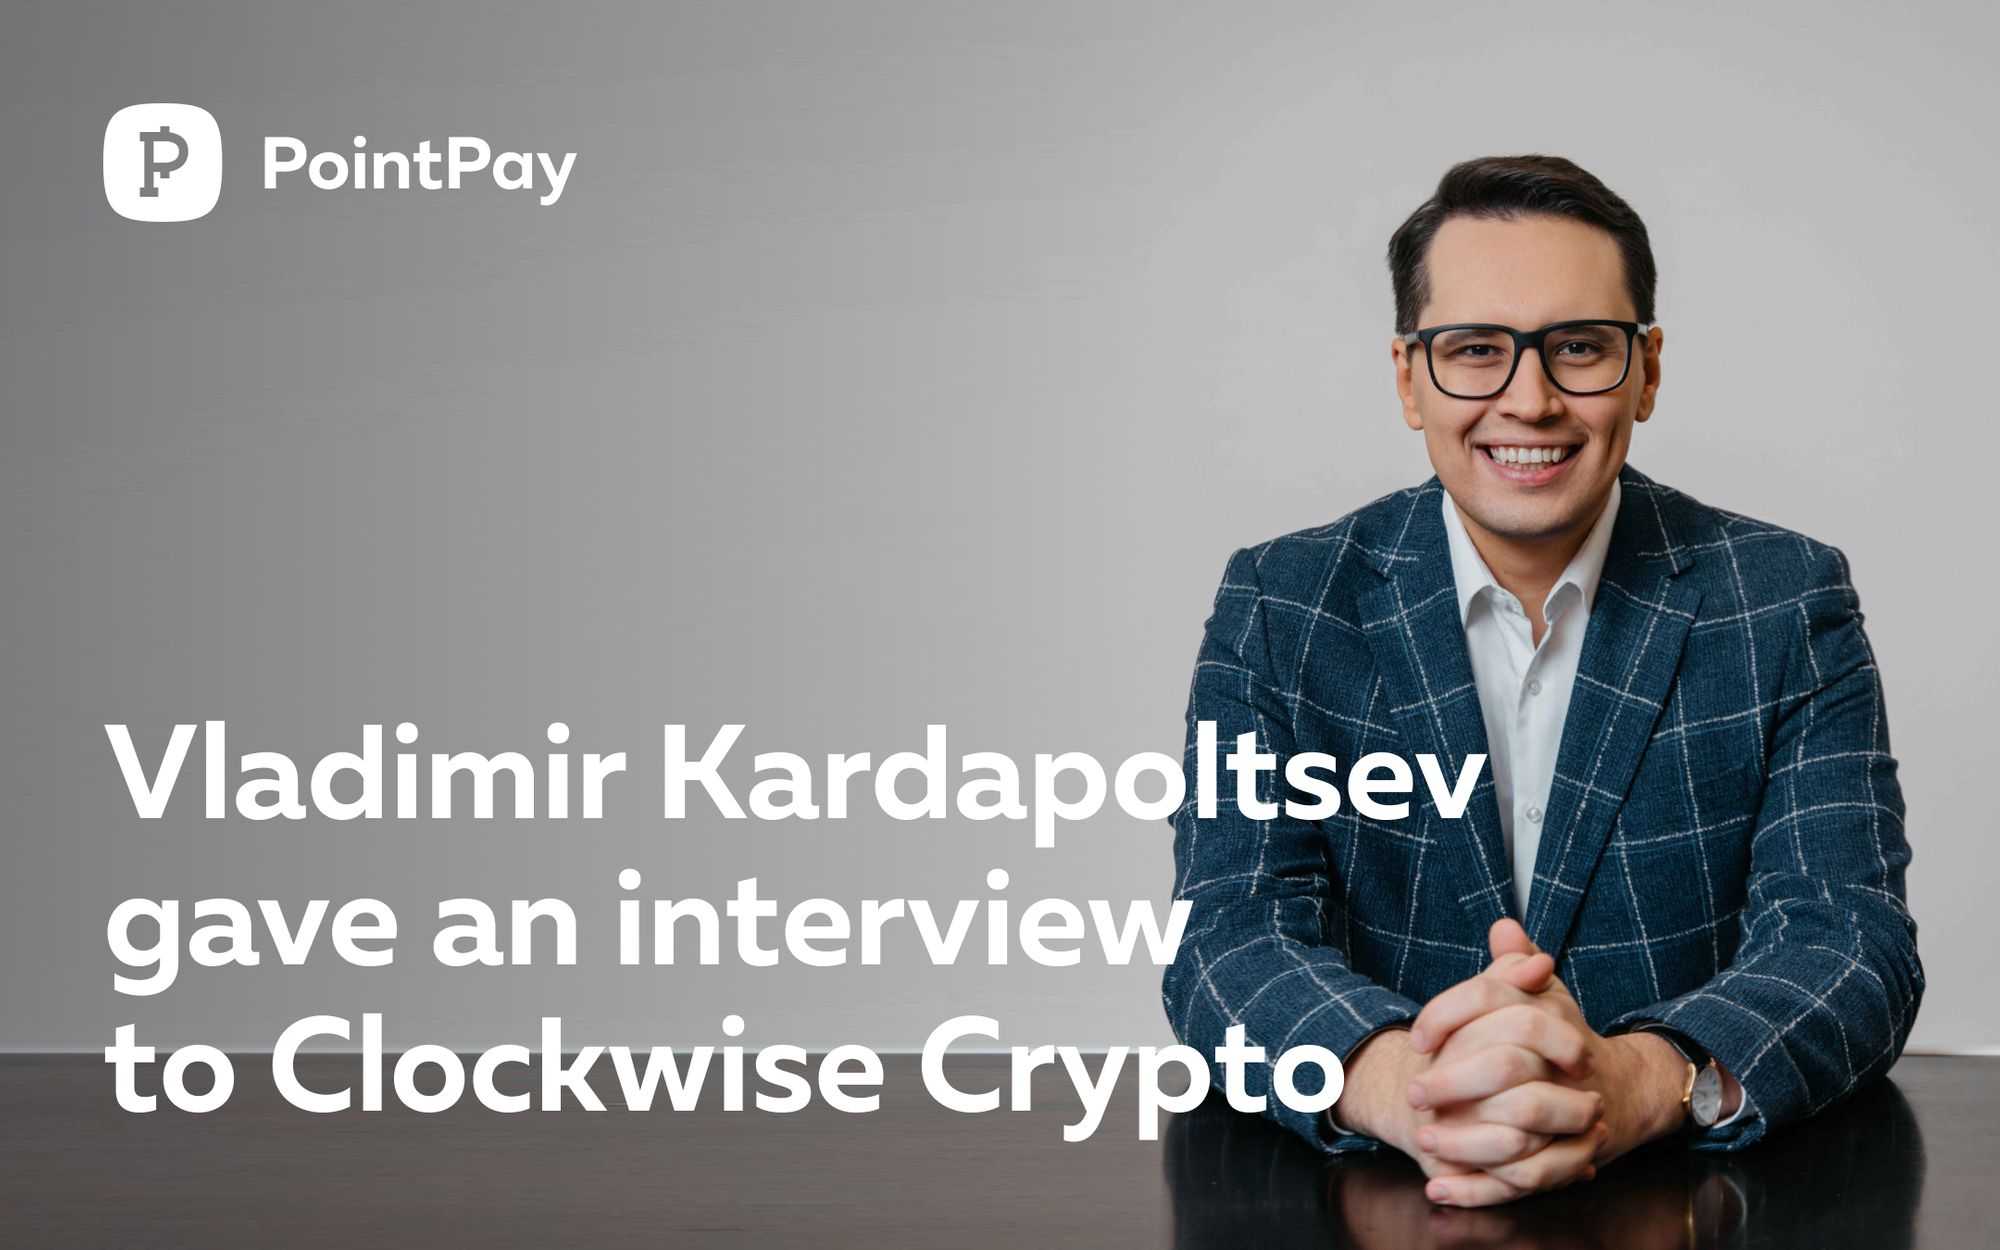 PointPay CEO — Vladimir Kardapoltsev spoke with Clockwise Crypto